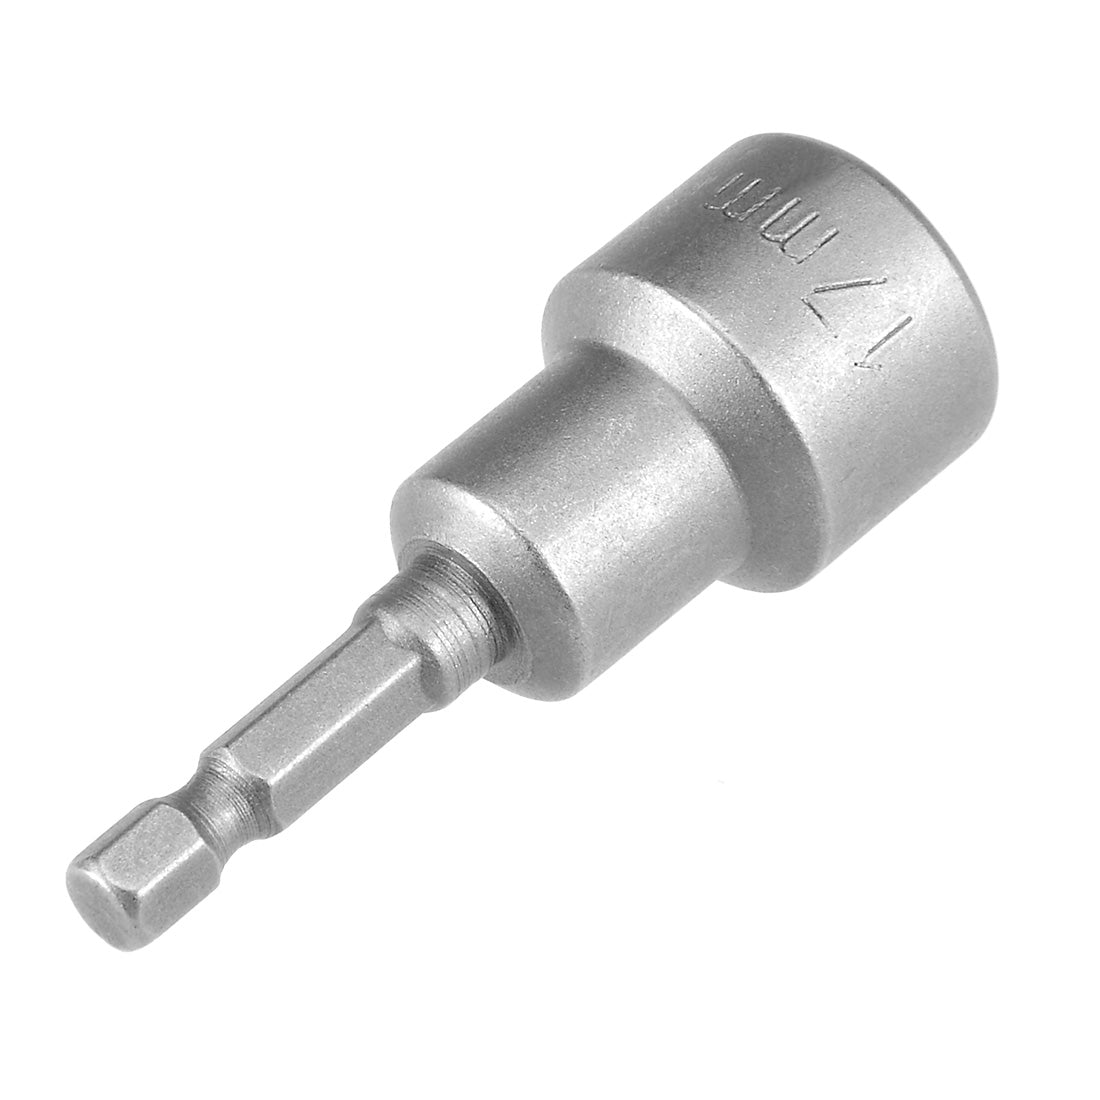 uxcell Uxcell Quick-Change Hex Shank Magnetic Nut Setter Driver Drill Bit, Metric